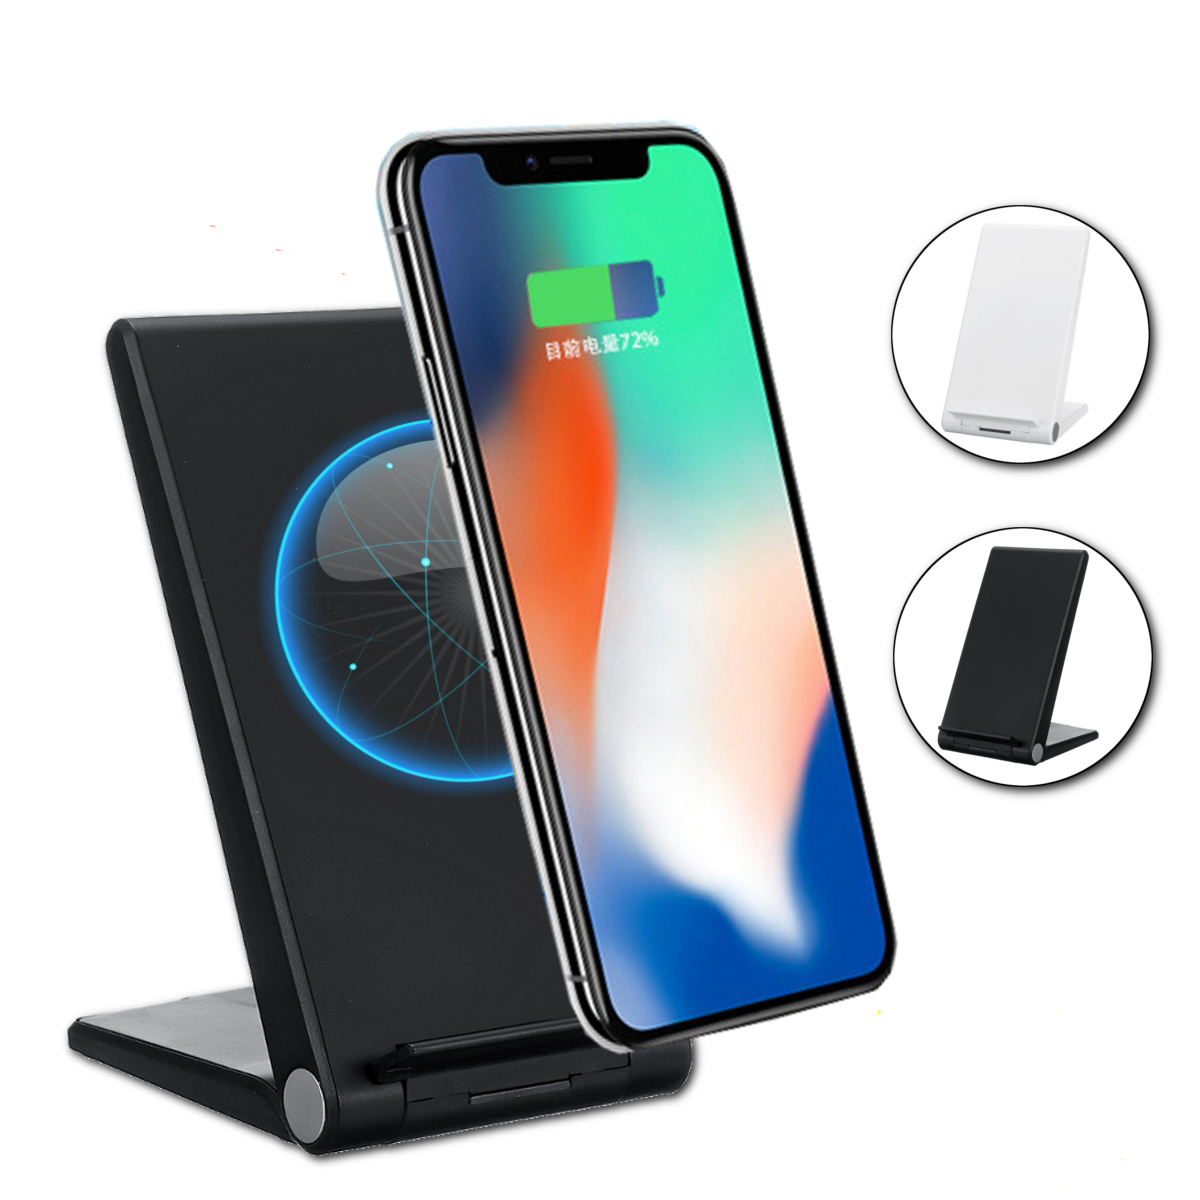 

Type-C 15W Dual Coils Qi Wireless Charger Fast Charging Desktop Phone Holder For Qi-enabled Smart Phone iPhone XS Max Samsung Galaxy S10+